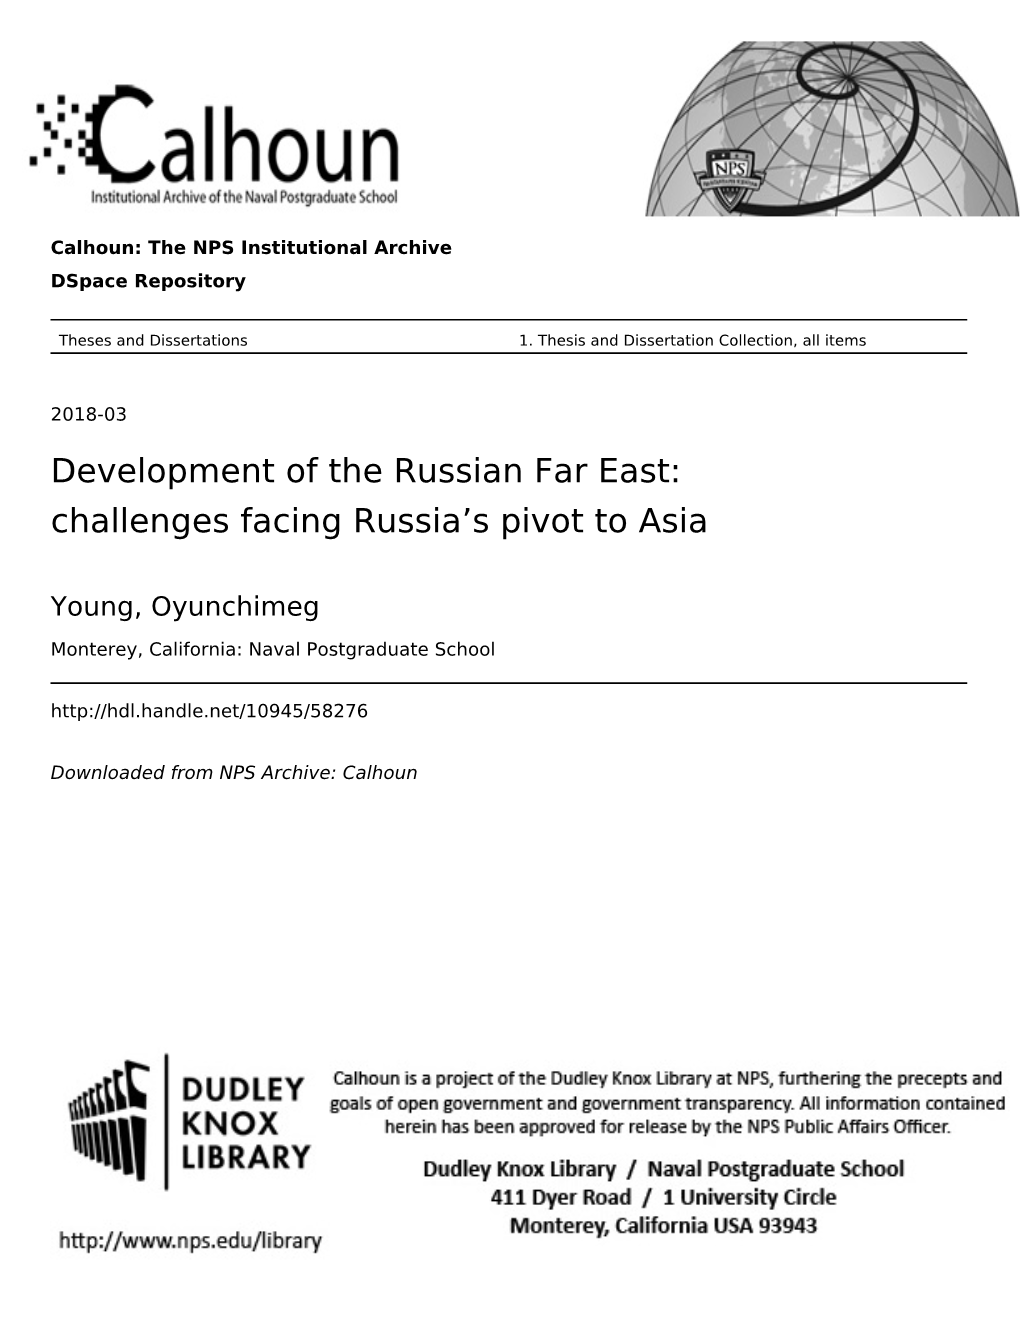 Development of the Russian Far East: Challenges Facing Russia’S Pivot to Asia